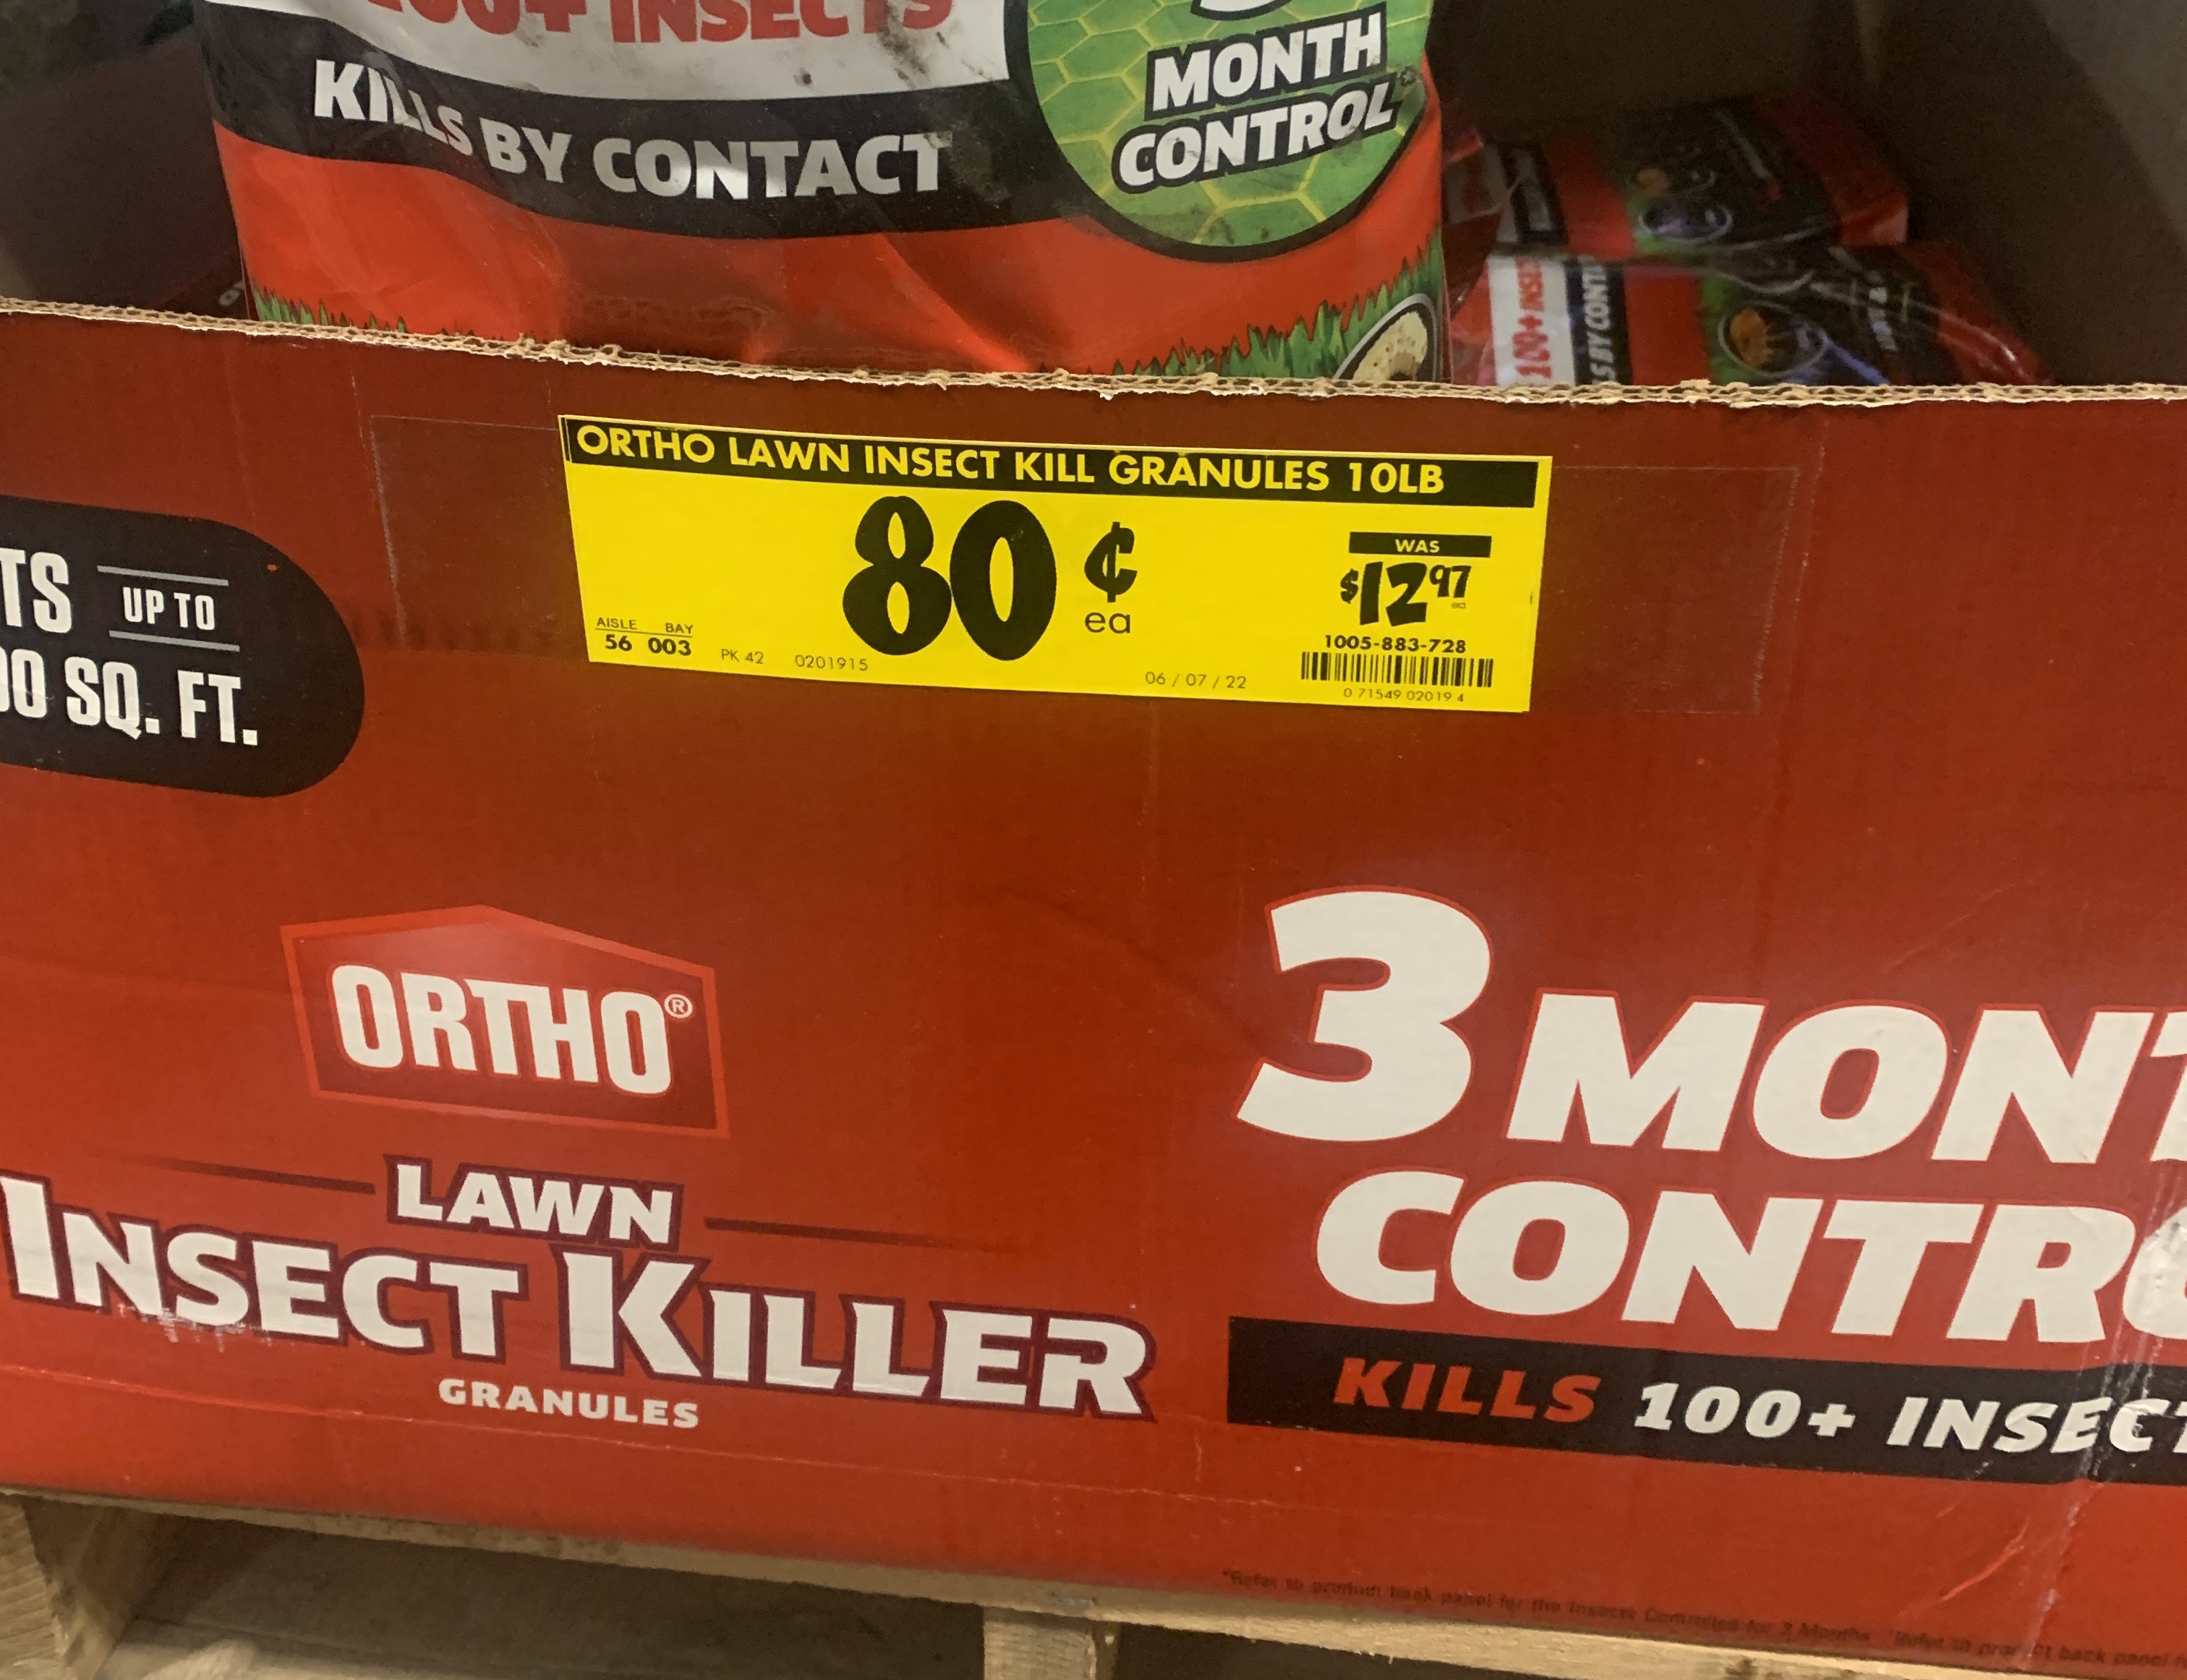 Ortho 10lb Lawn Insect Killer for Gardens/Perimeter Treatment 3mo/10K sqft - YMMV In Store Home Depot $0.8